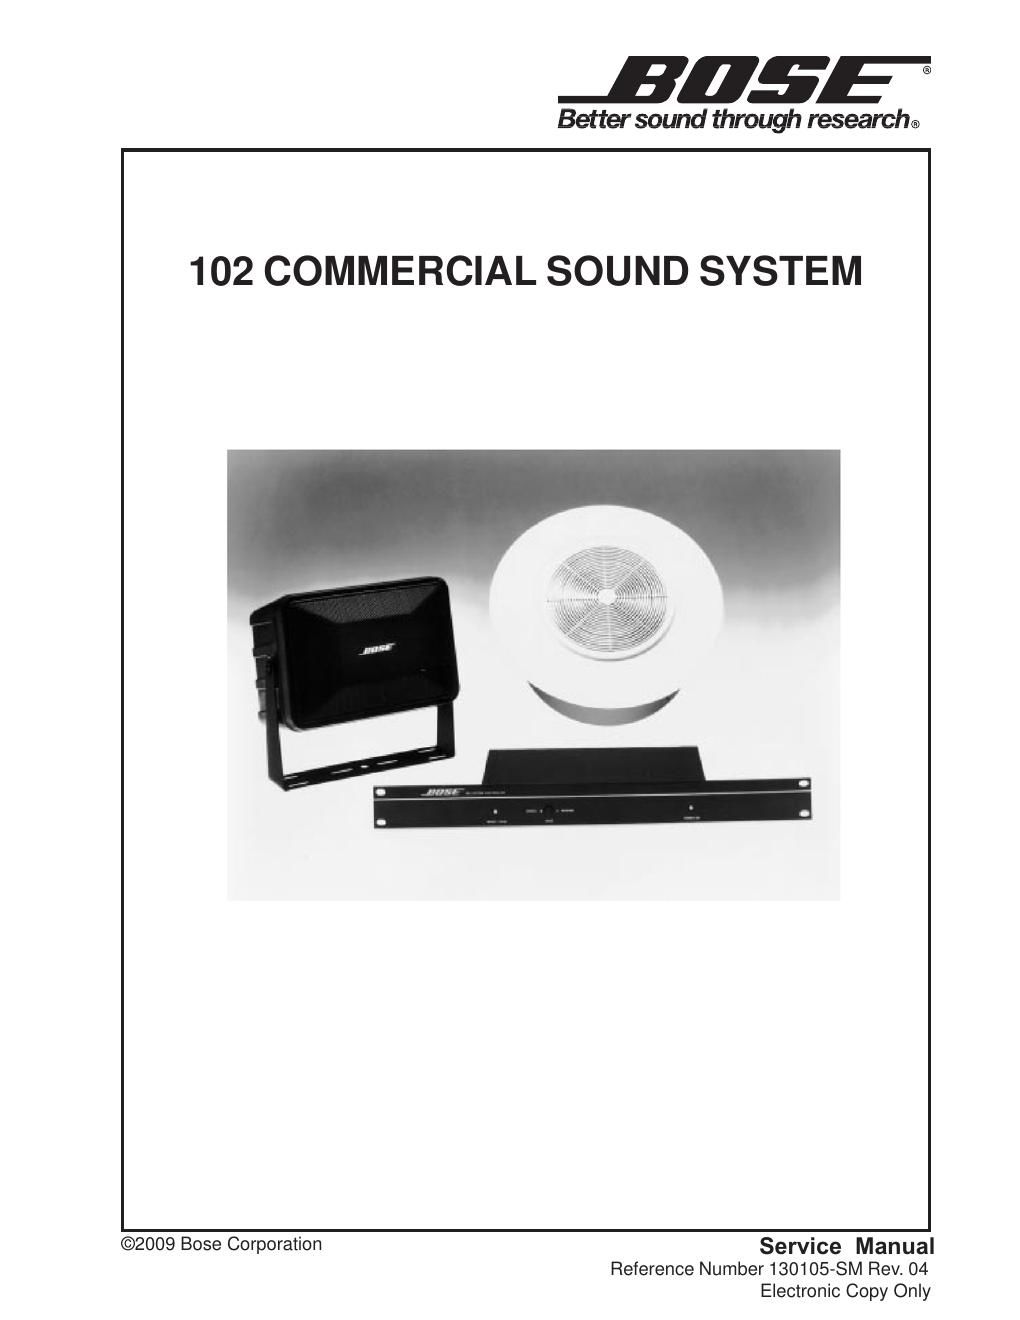 bose 102 commercial sound system manual rev4